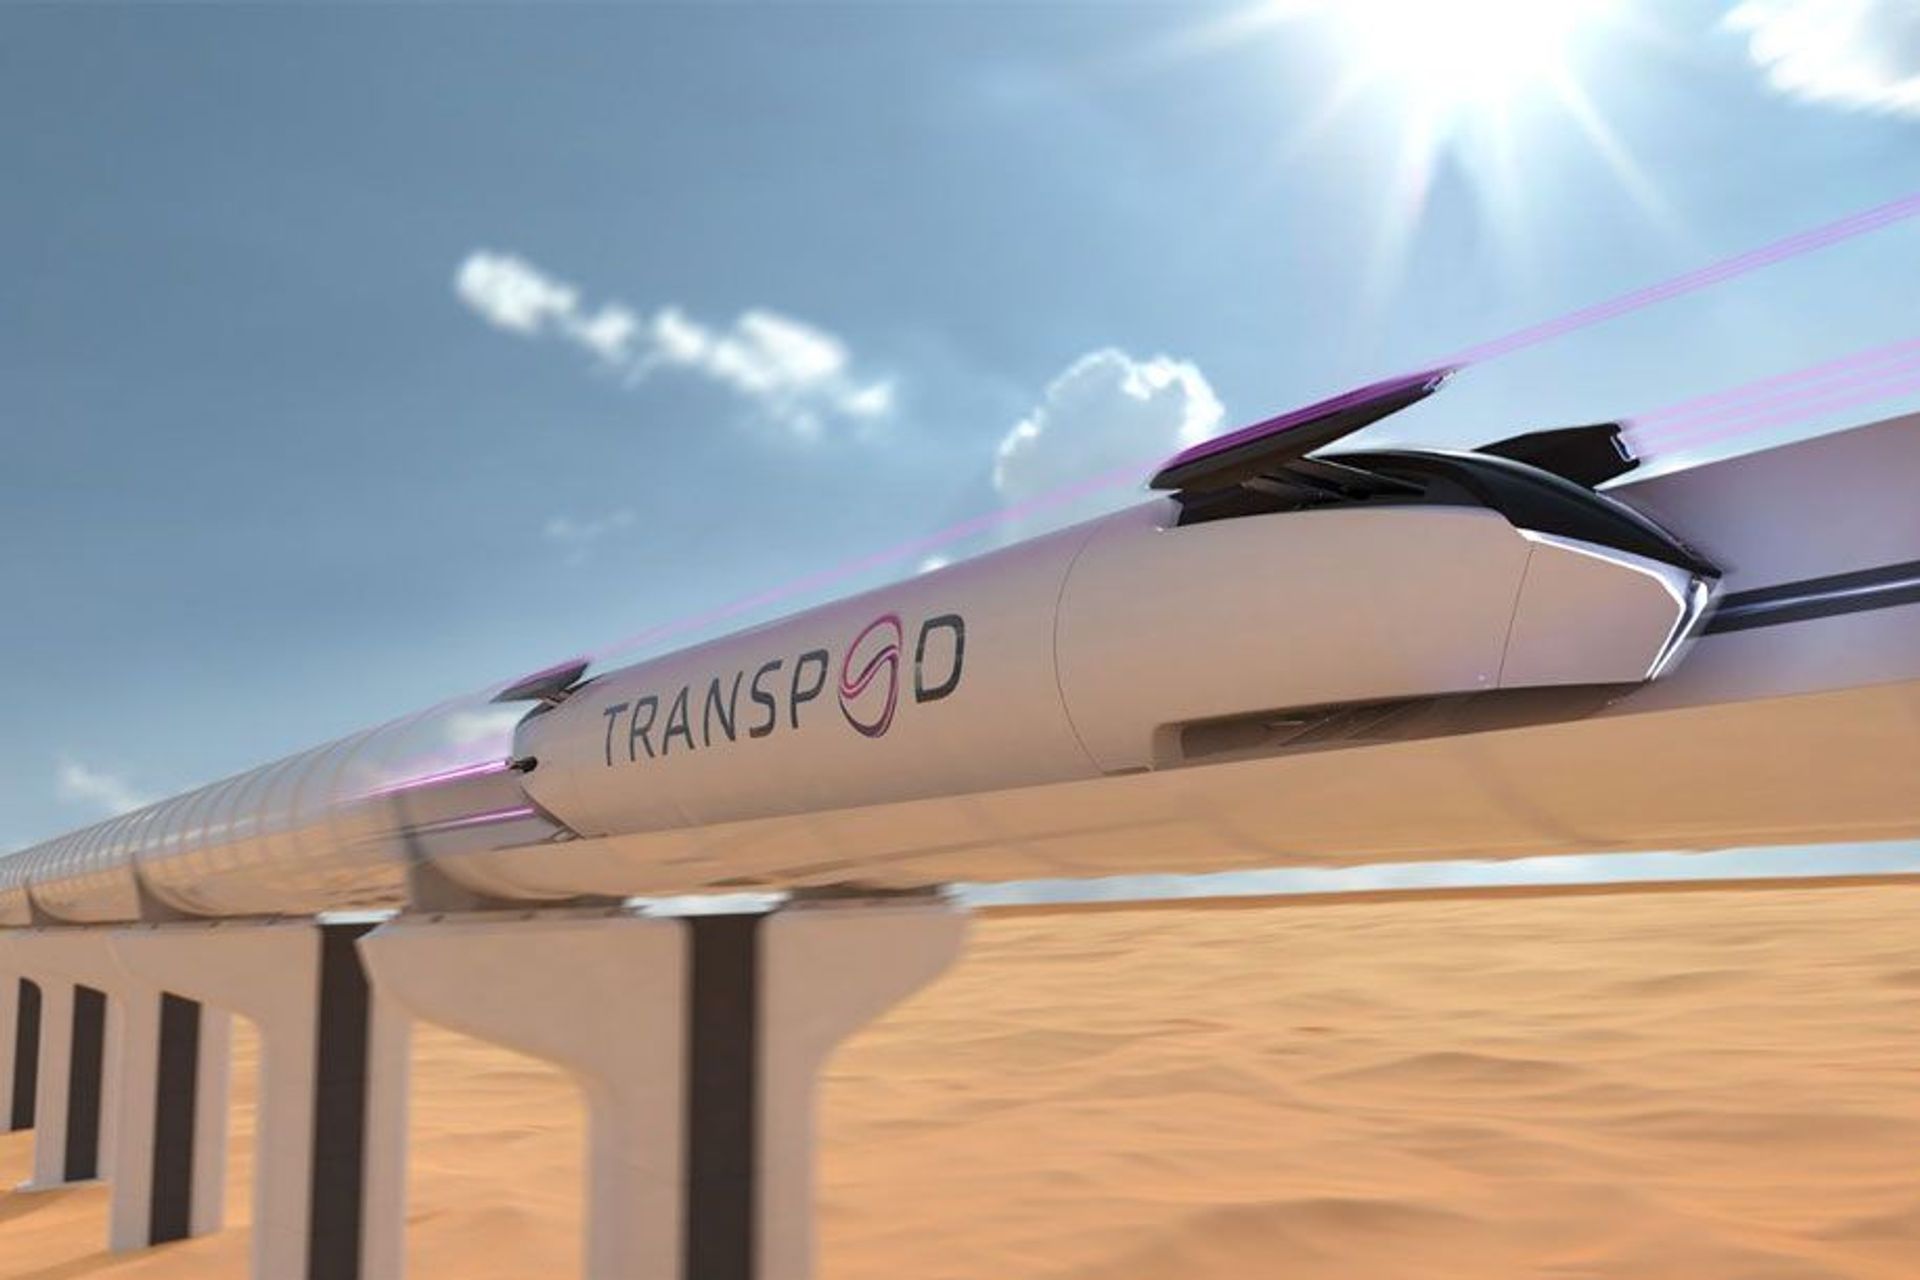 FluxJet is a sustainable 1000 kmh tubular means of transport